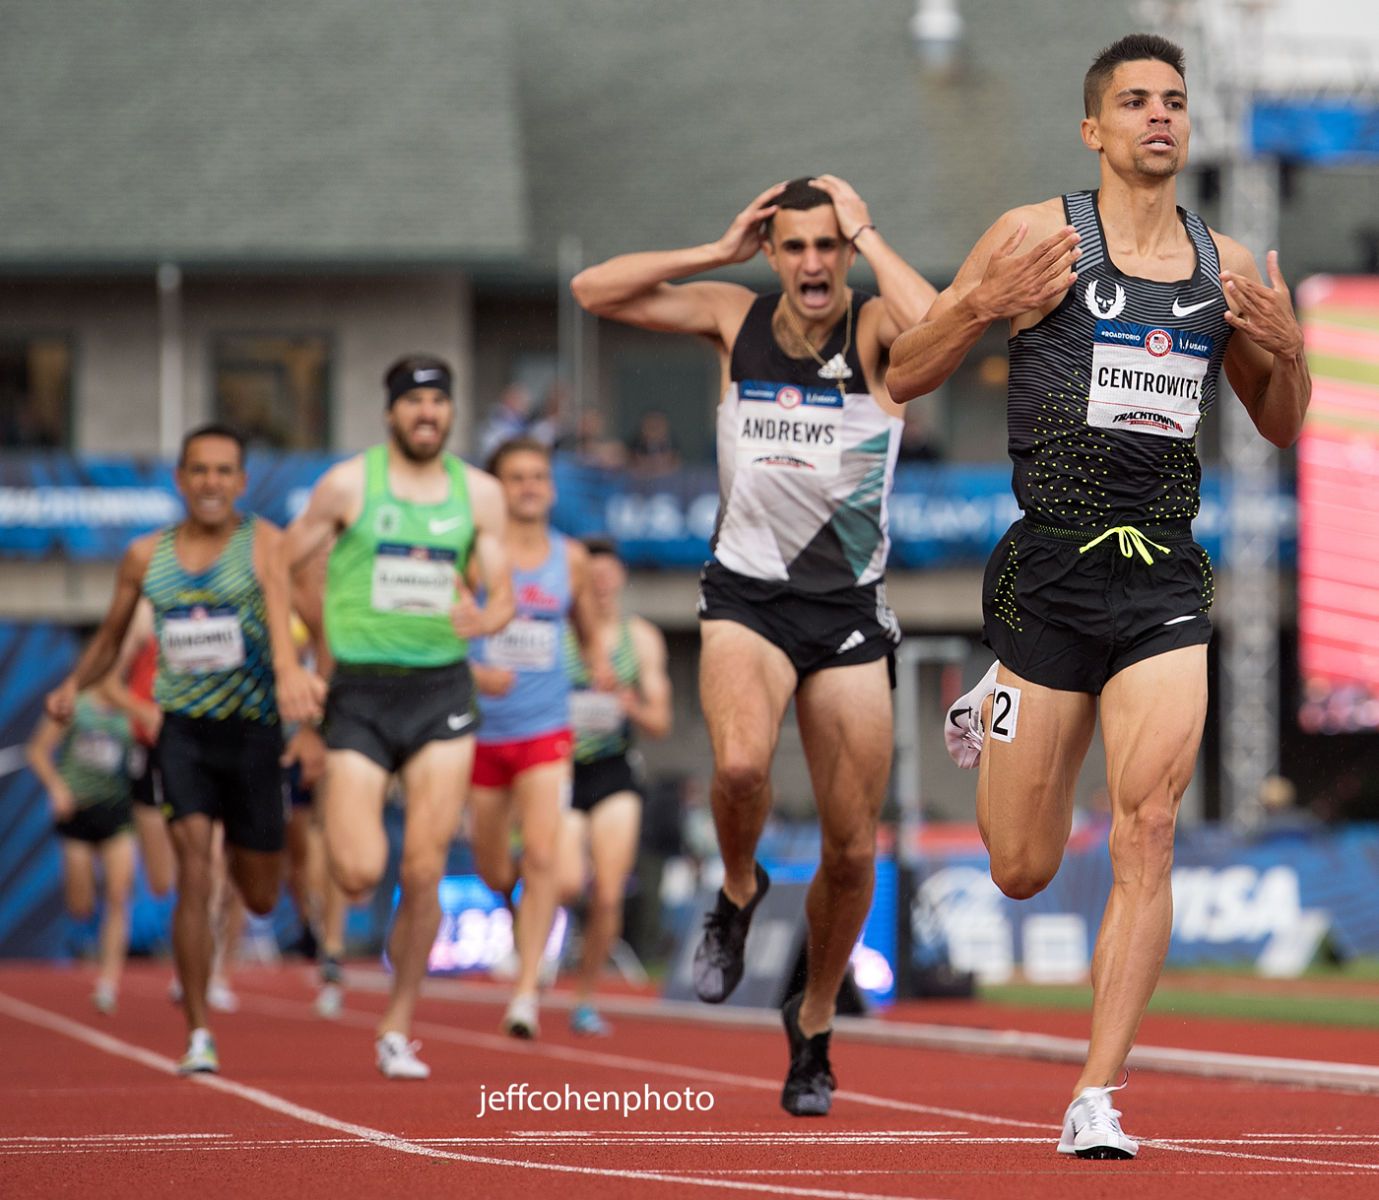 1r2016_oly_trials_day_9_centrowitz_1500m_win_a_jeff_cohen_photo_29942_web.jpg